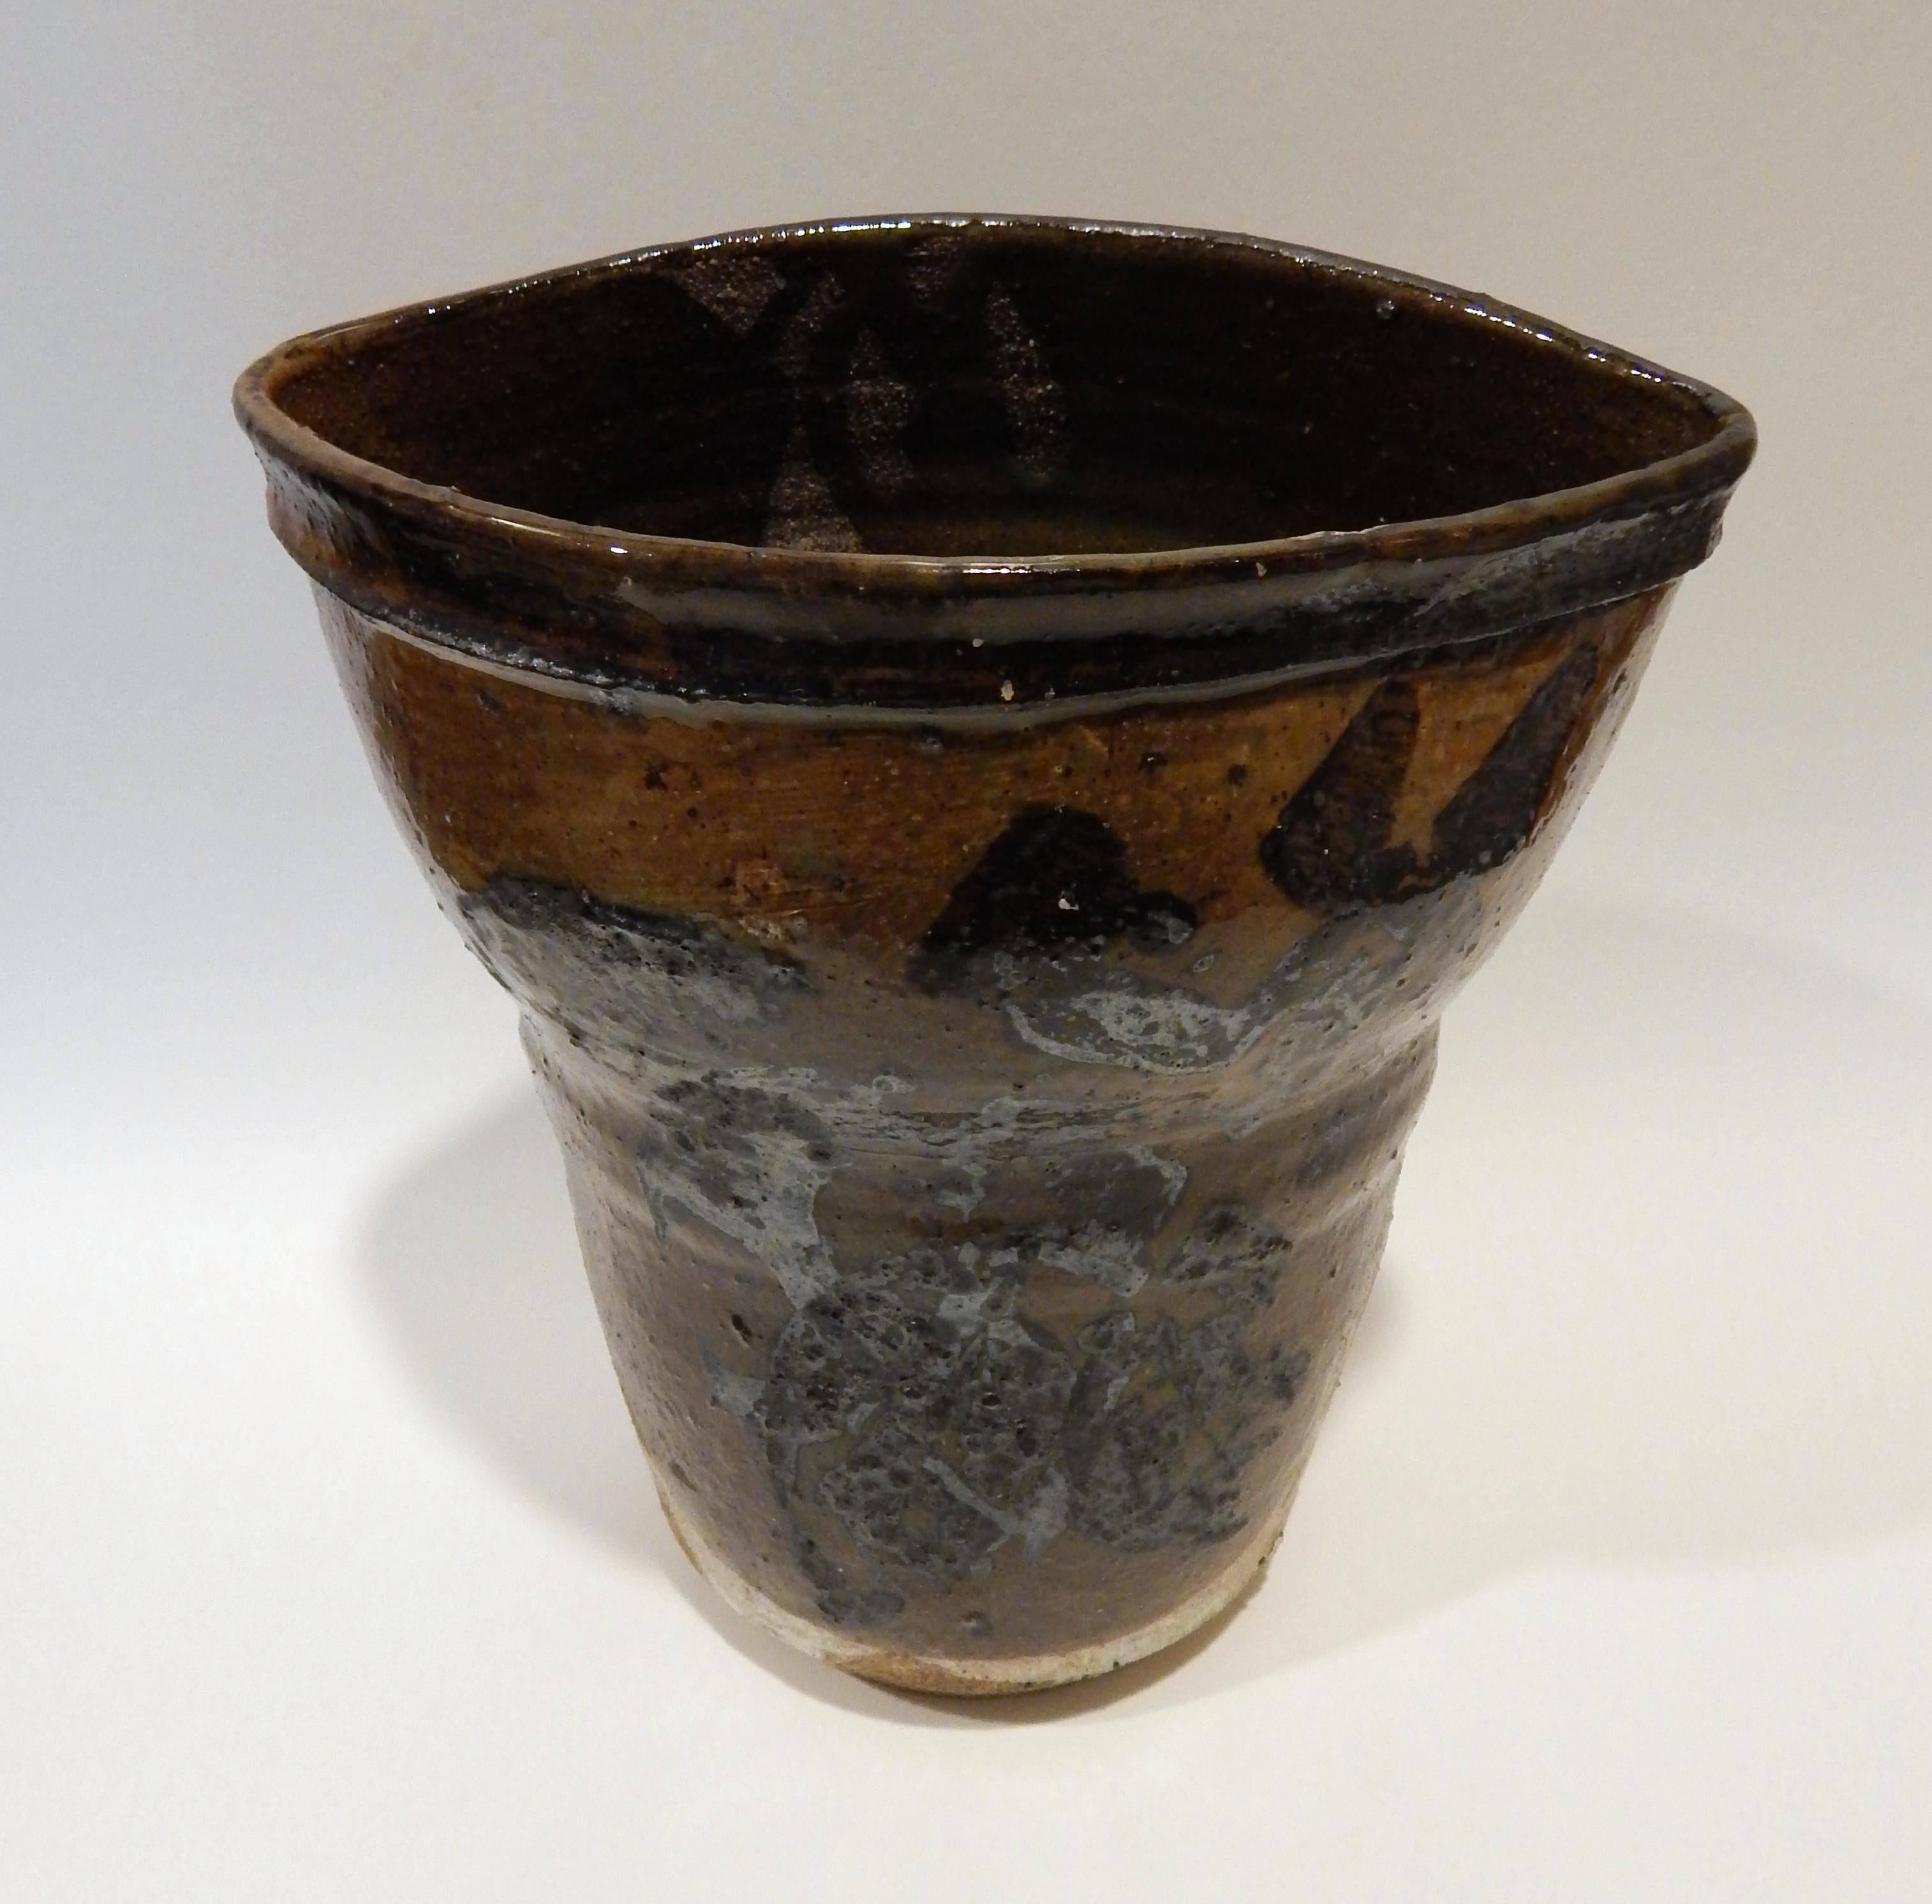 Paul Soldner (1921-2010) abstract expressionist pottery vase.
Glaze in black and brown, partly unglazed.
Excellent design, mint condition.
Signed Soldner on the bottom.
Measures: 10